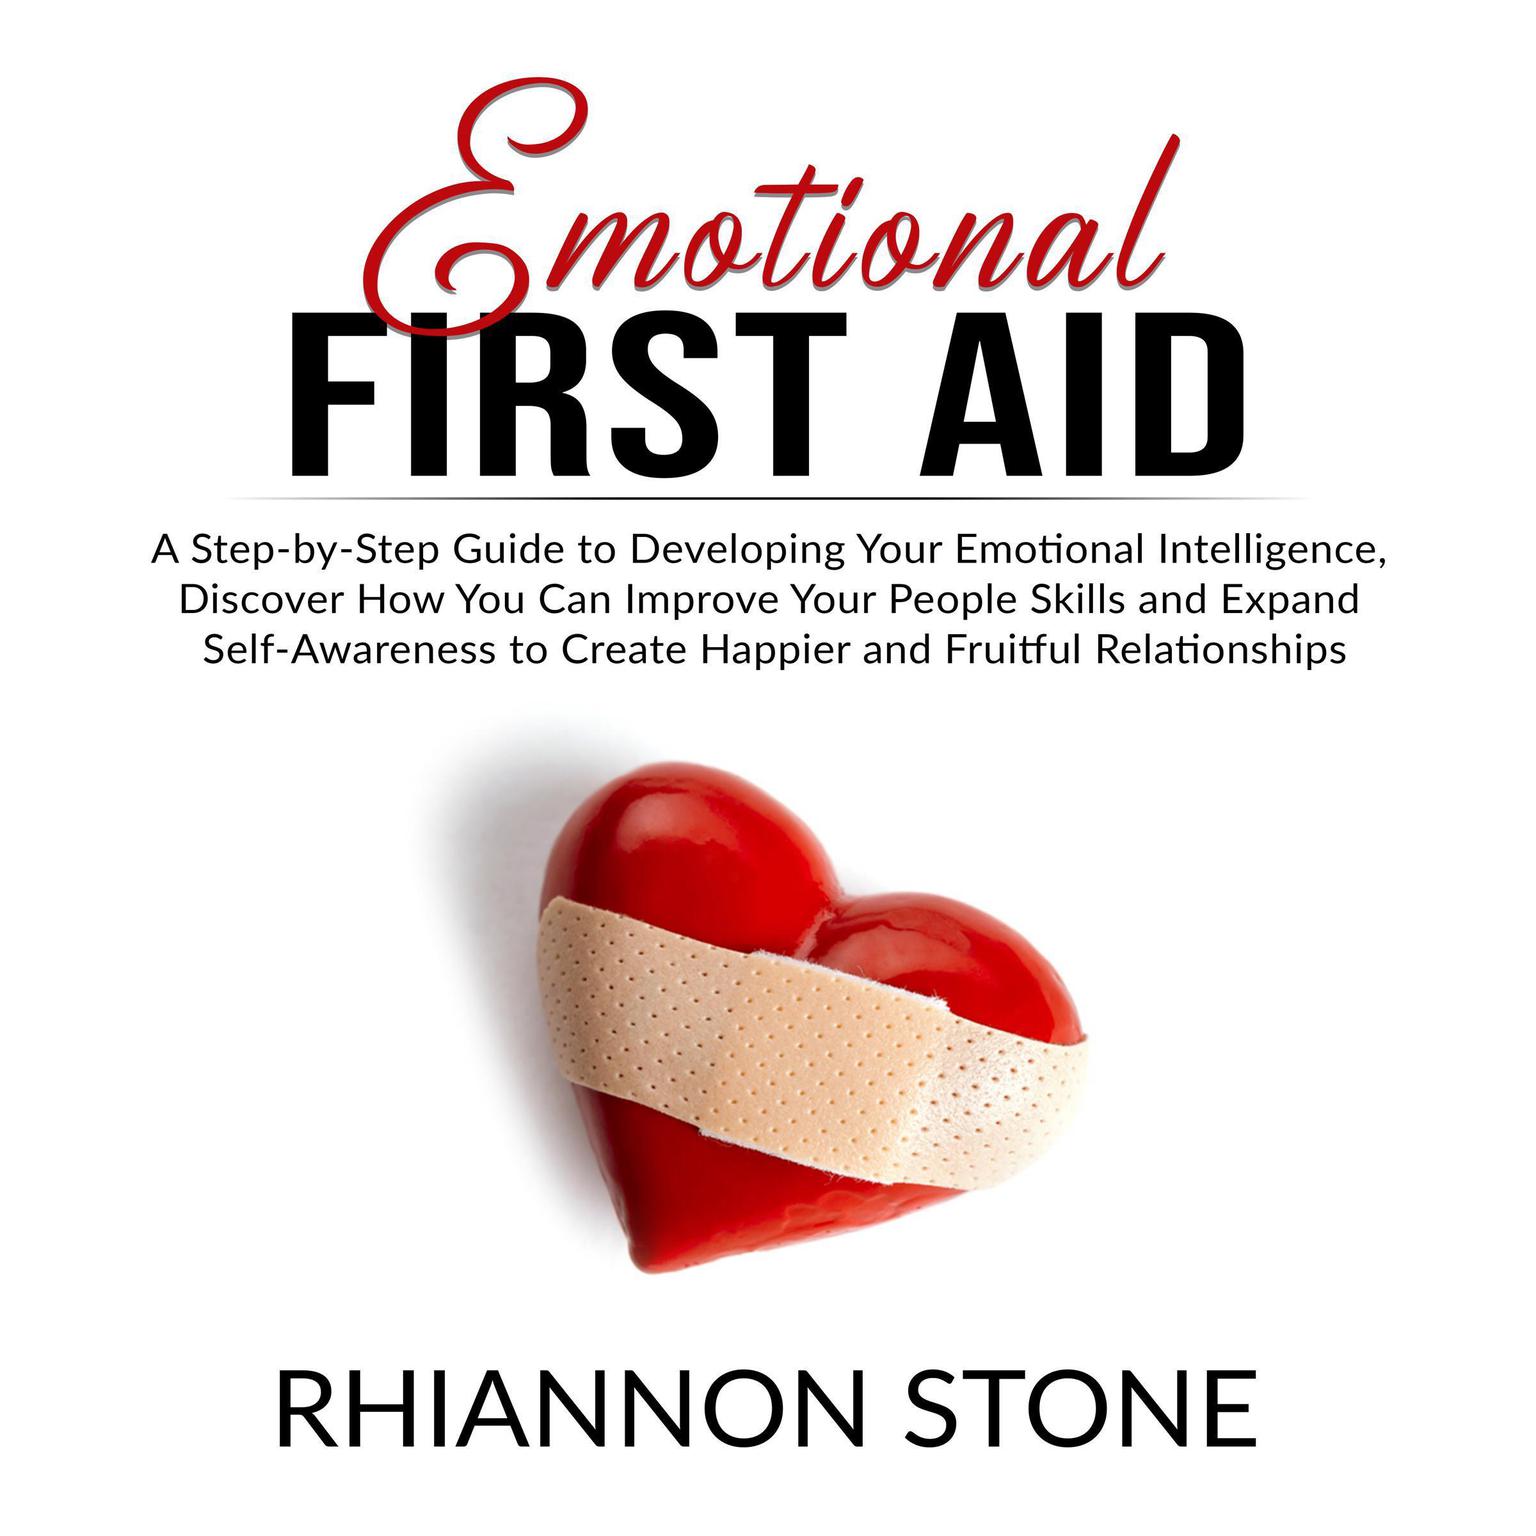 Emotional First Aid: A Step-by-Step Guide to Developing Your Emotional Intelligence,  Discover How You Can Improve Your People Skills and Expand Self-Awareness to Create Happier and Fruitful Relationships Audiobook, by Rhiannon Stone